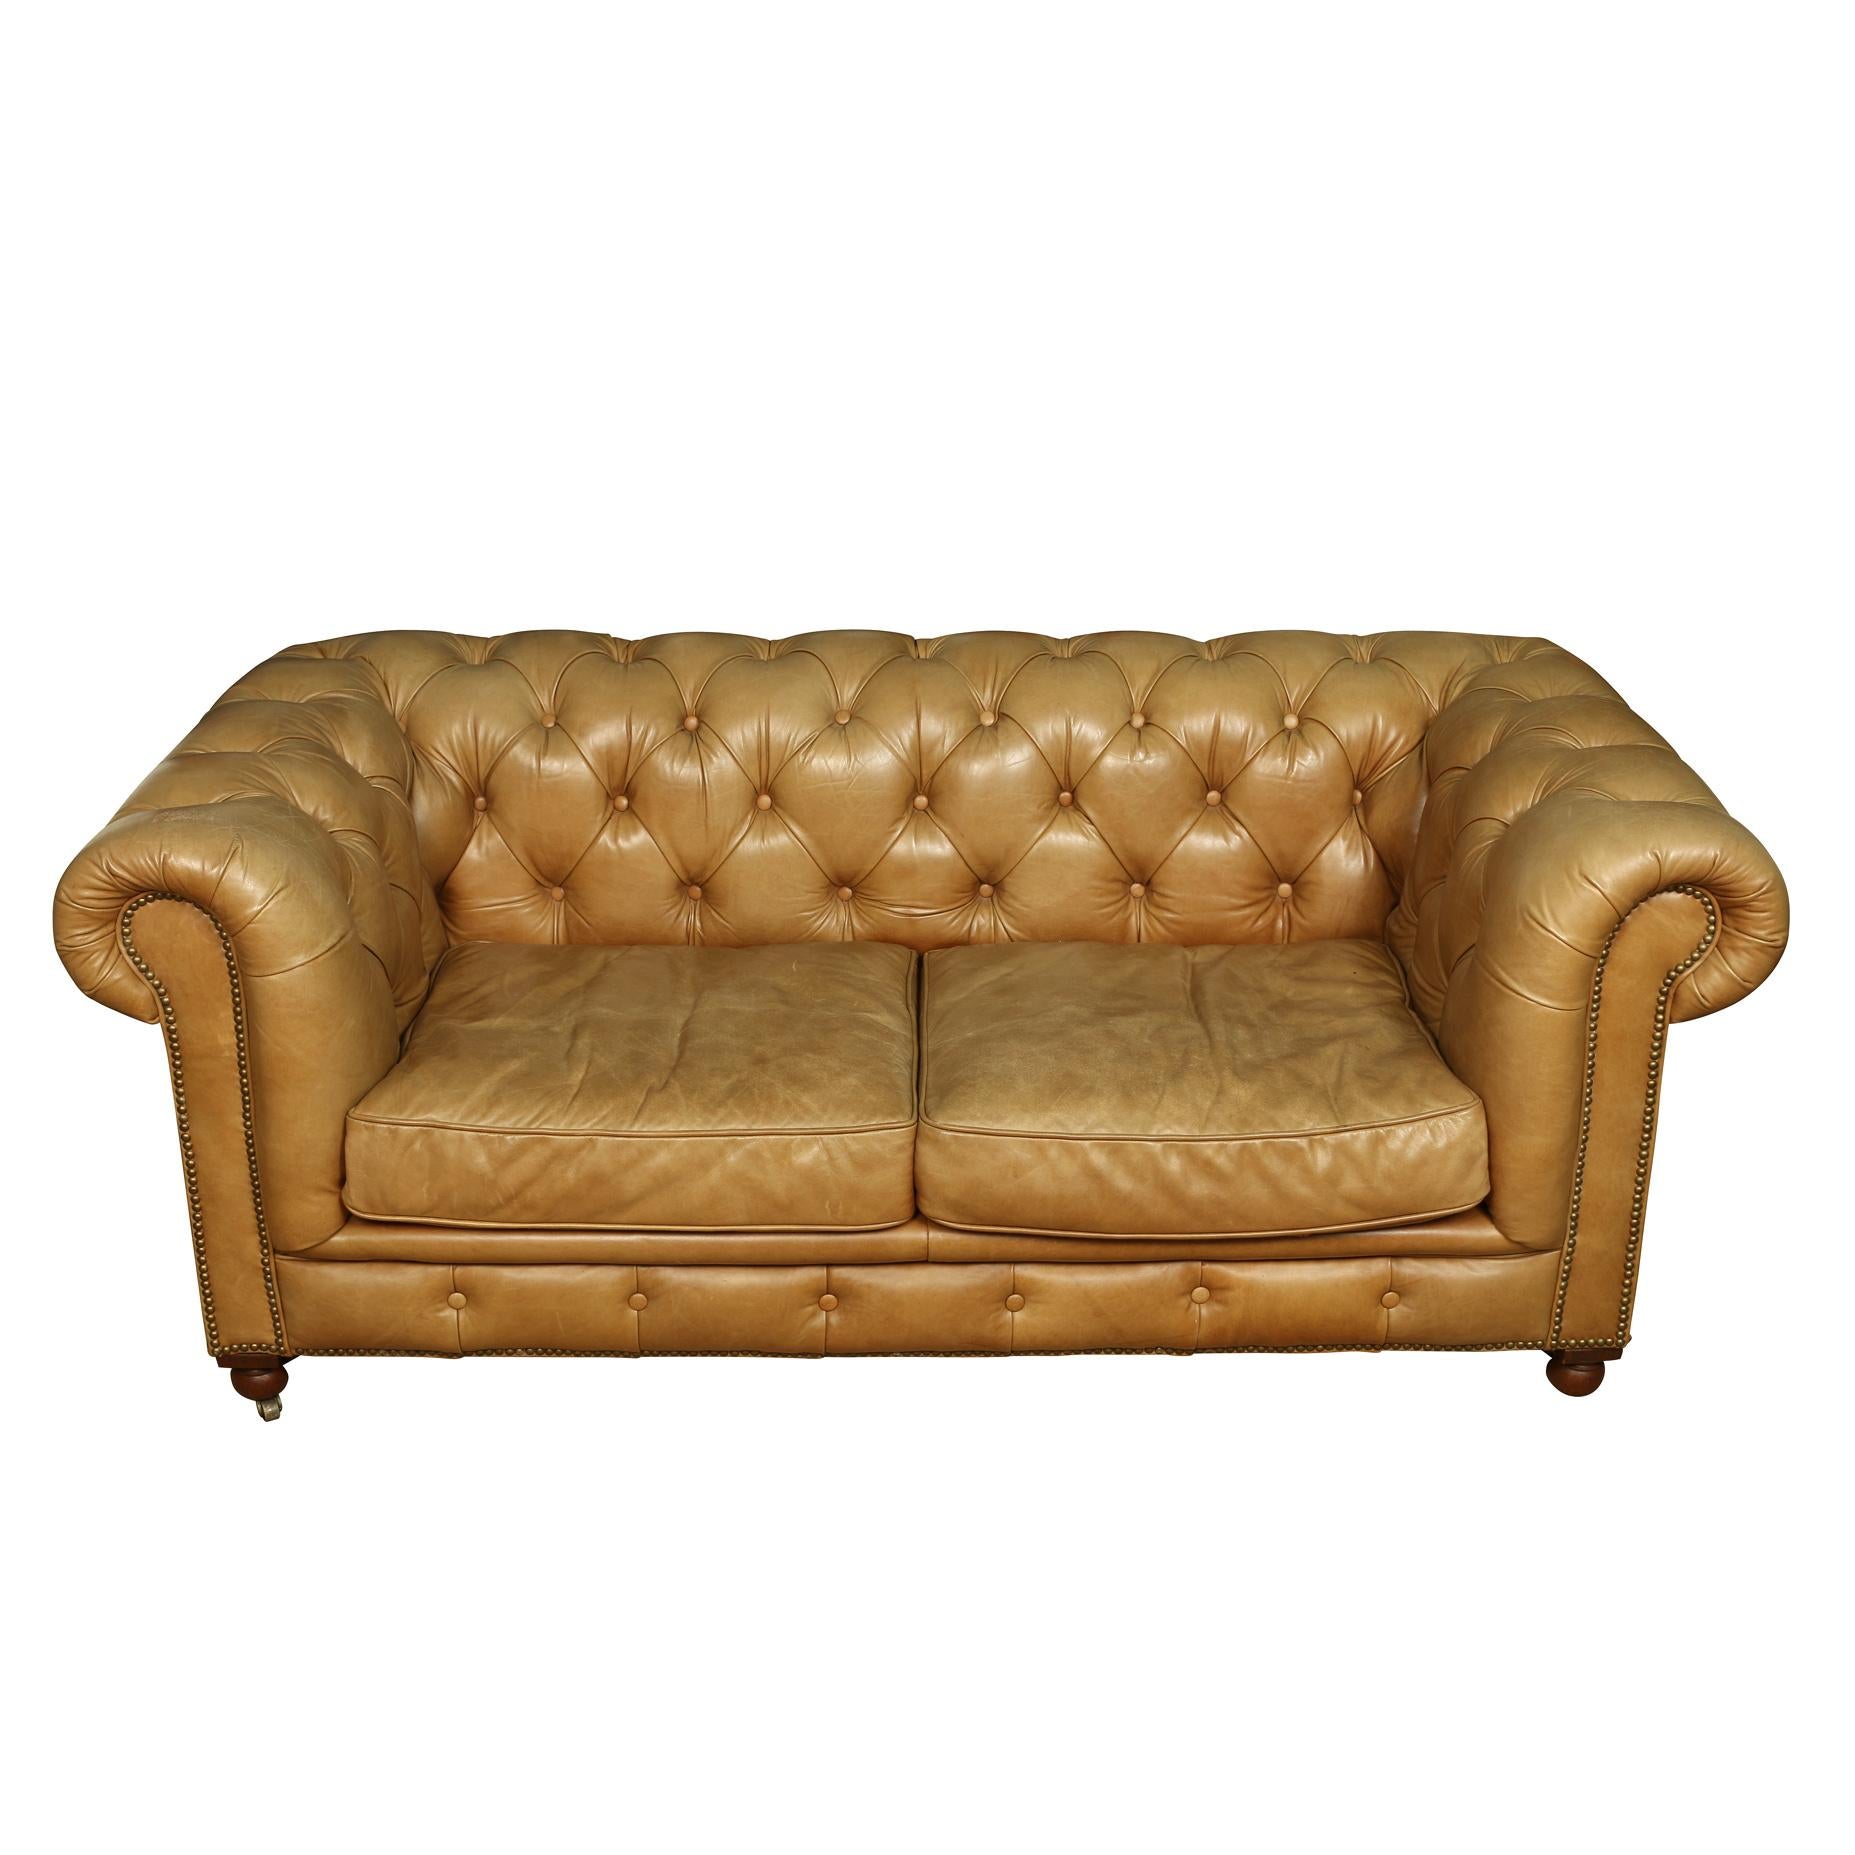 20th Century Vintage Leather Tufted Chesterfield Lovesesat